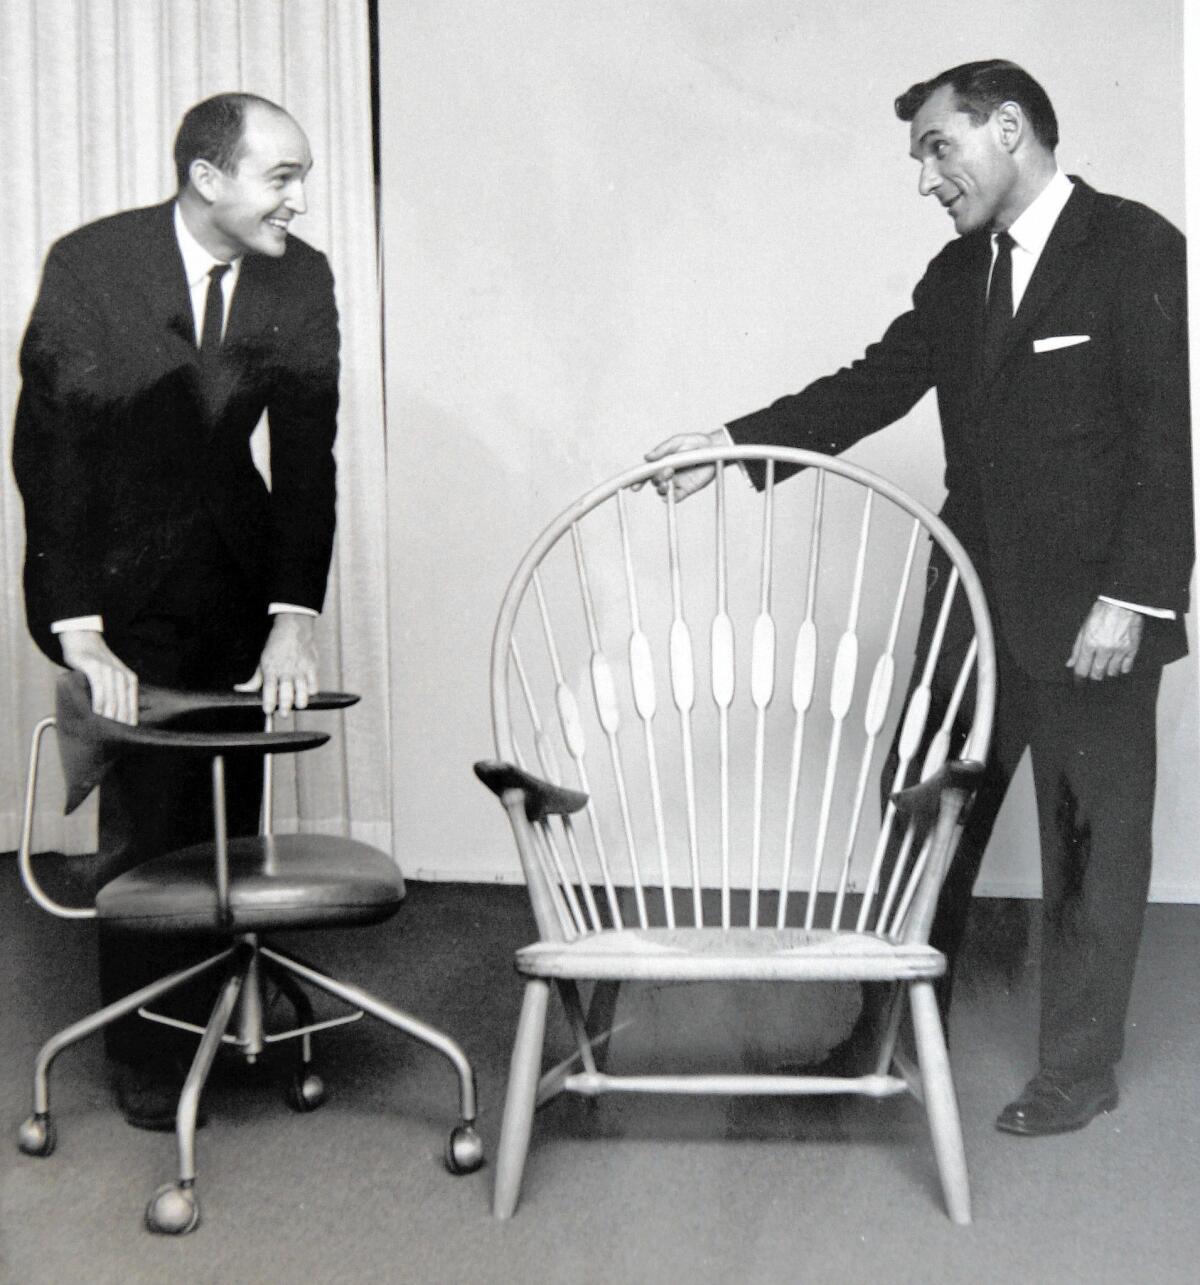 Ron Frank, left, and his uncle, Ed Frank, with pieces of furniture from their cutting-edge Long Beach furnishings store, Frank Bros. The company was founded in 1938 and sold in 1982.